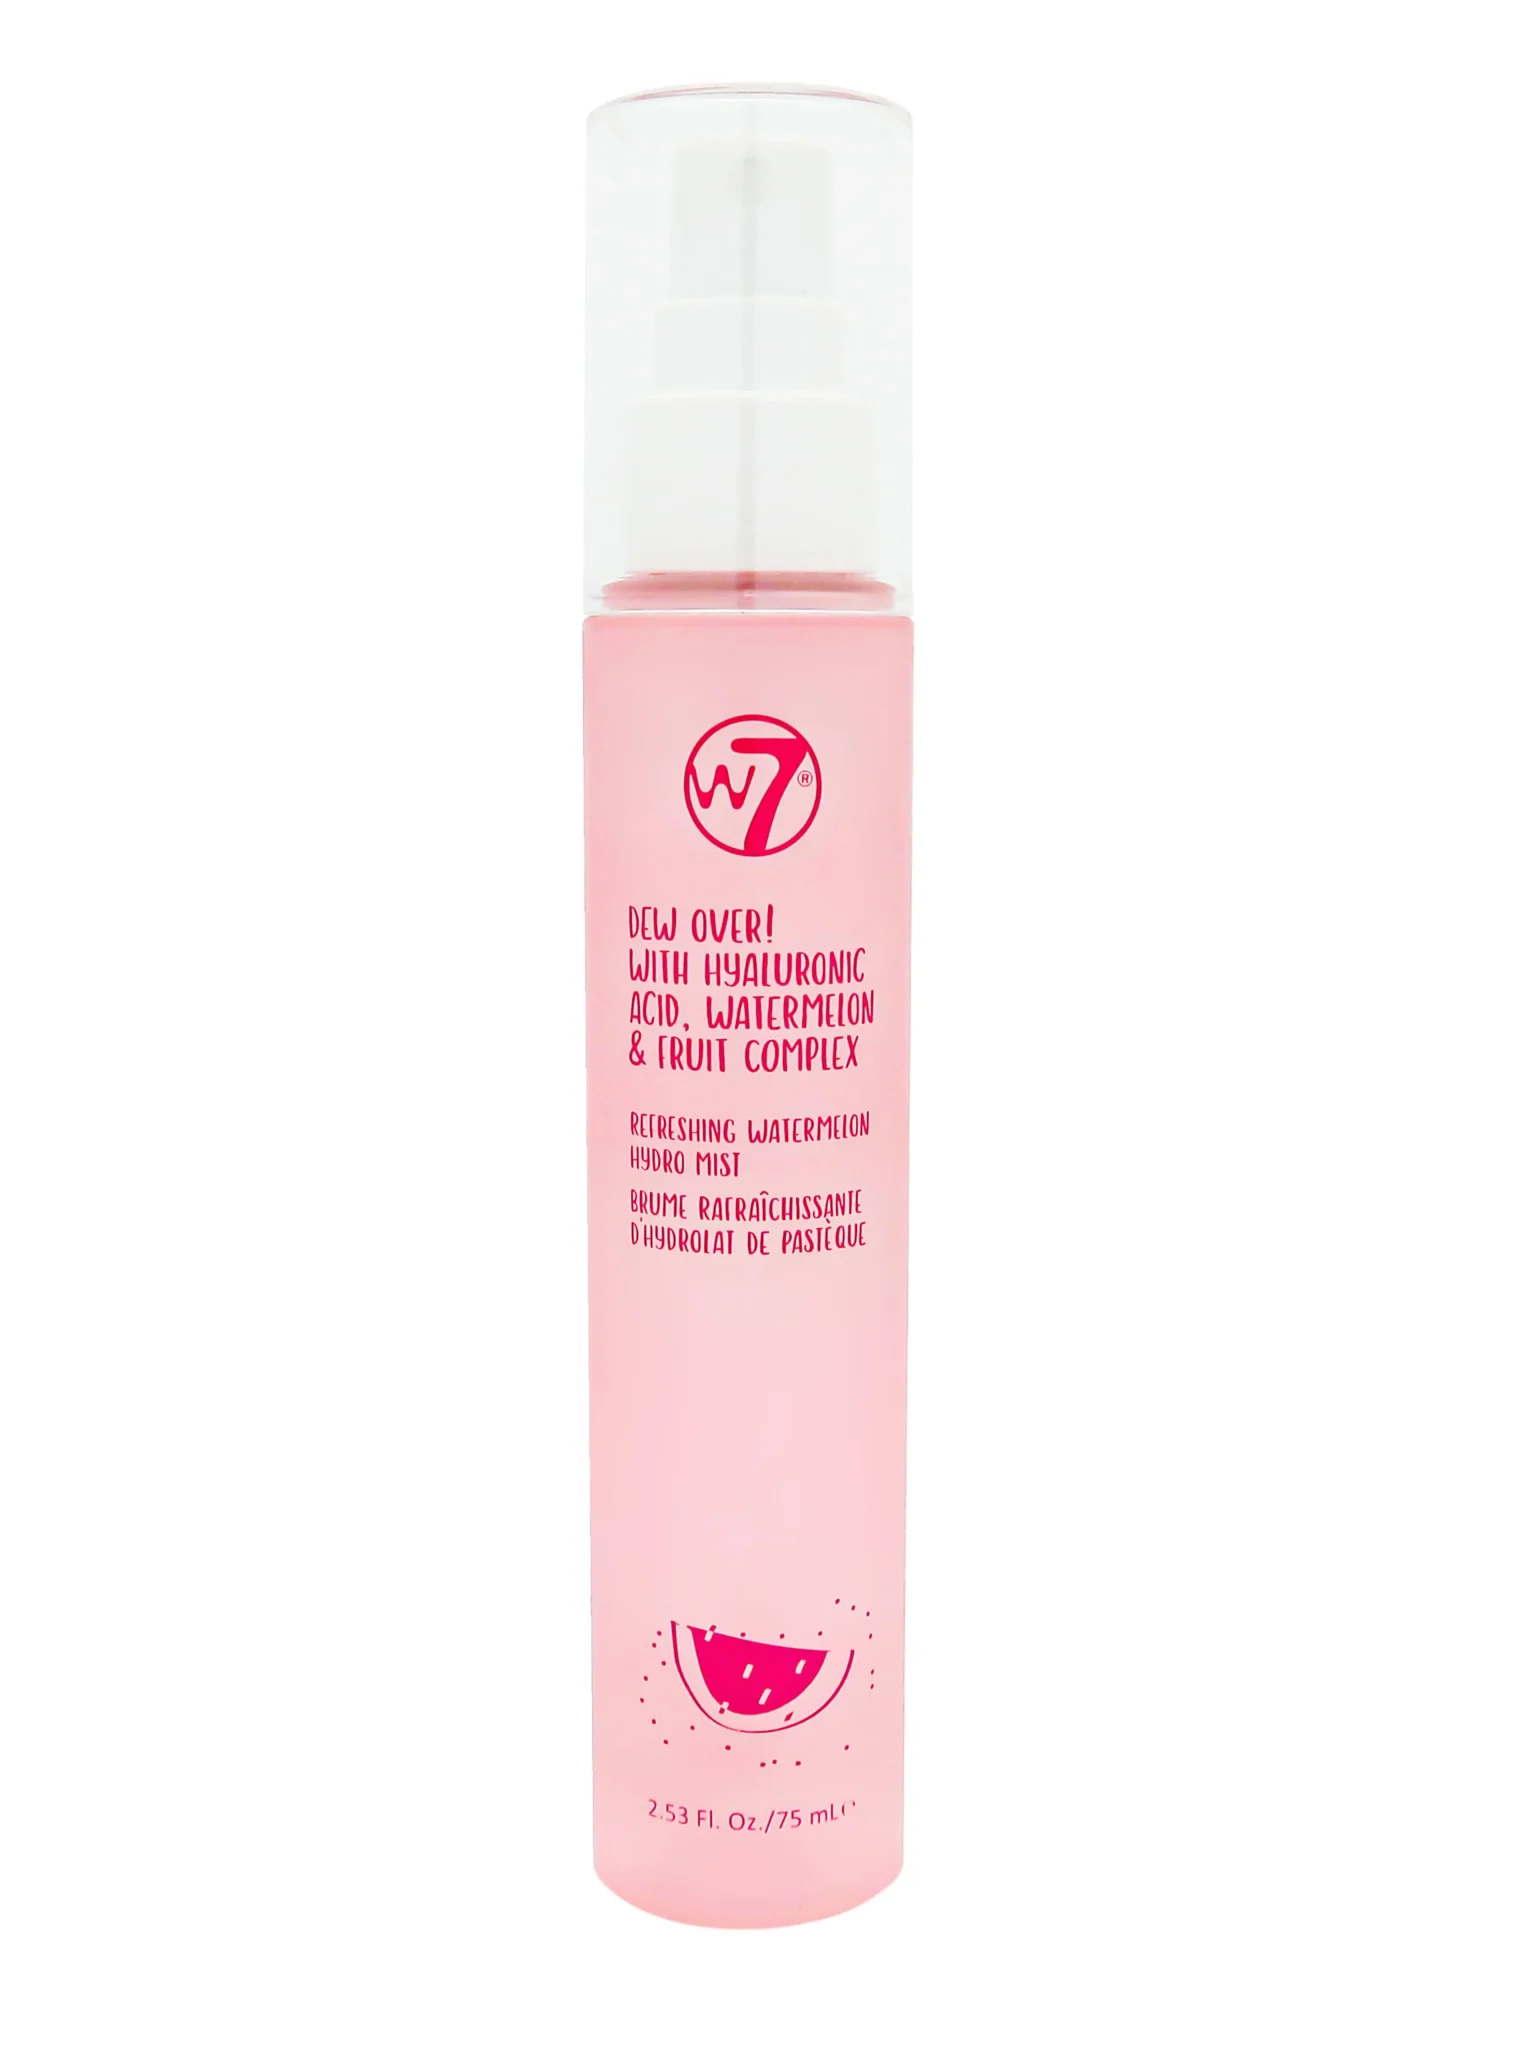 W7 dew over! hydrating face and body mist 75ml